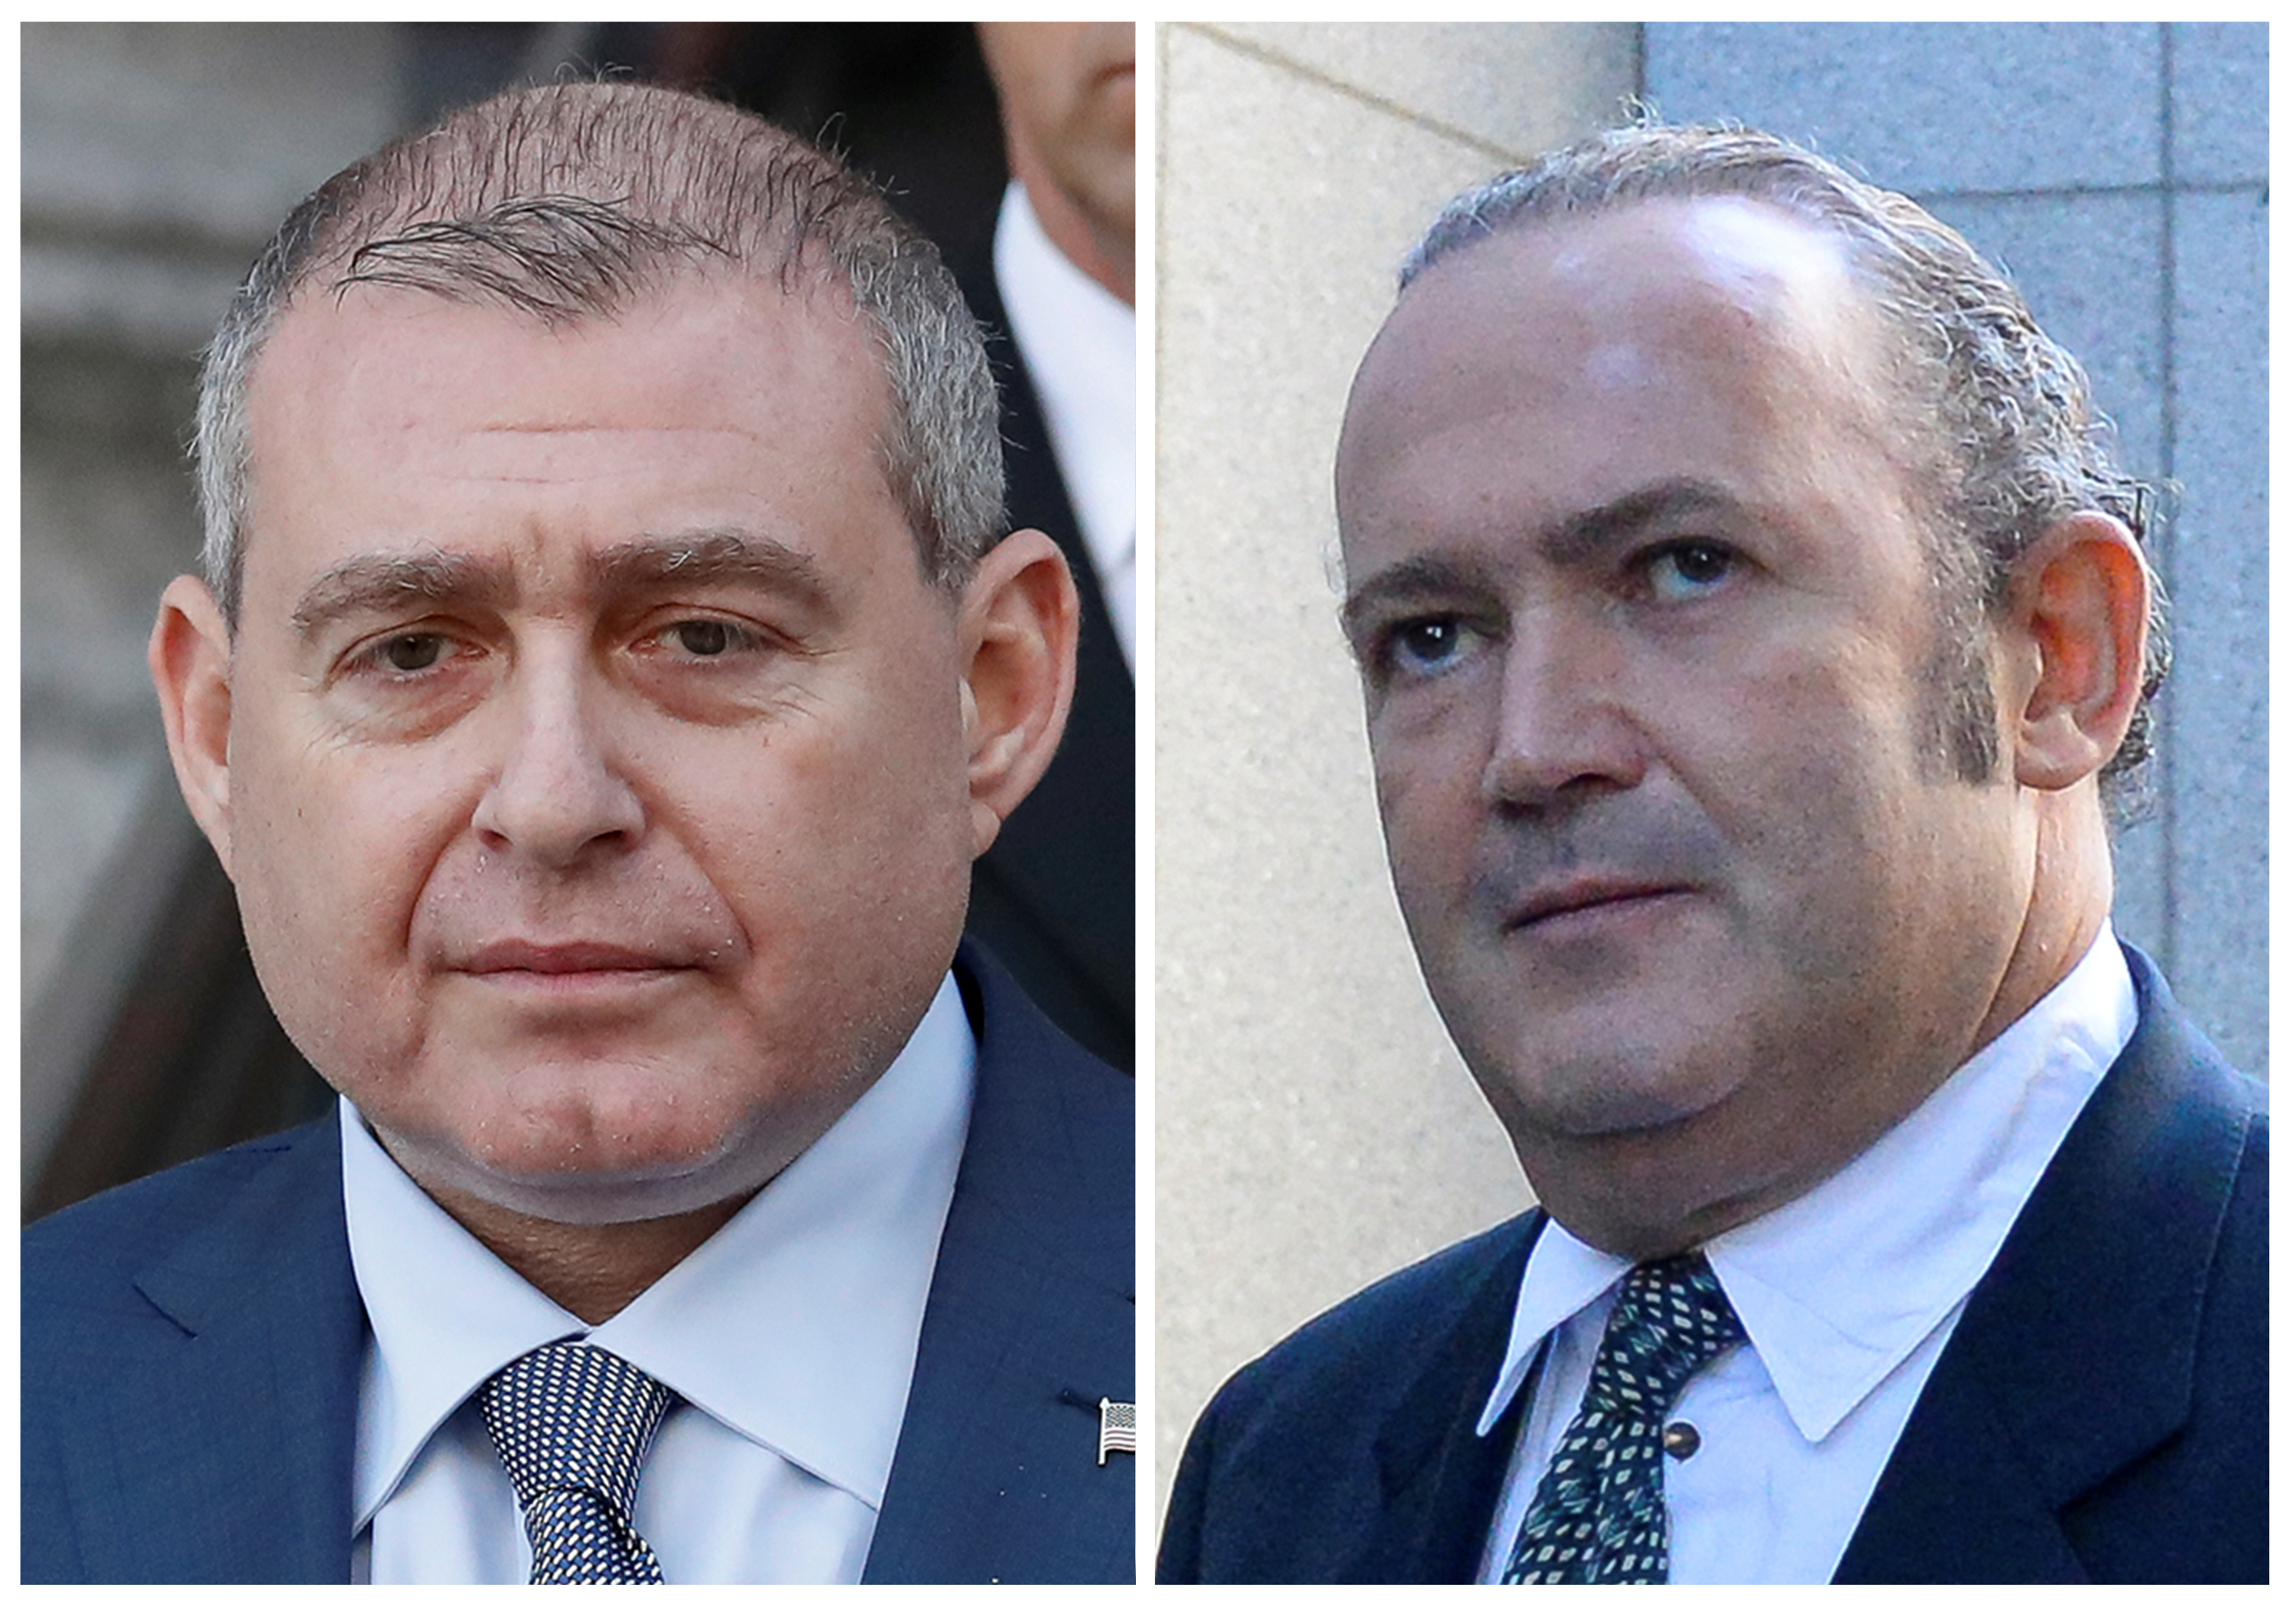 A combination file picture shows Ukrainian-American businessman Lev Parnas and Russian born businessman Igor Fruman exiting the United States Courthouse in the Manhattan borough of New York City, October 23, 2019.  REUTERS/Shannon Stapleton/Jefferson Siegel